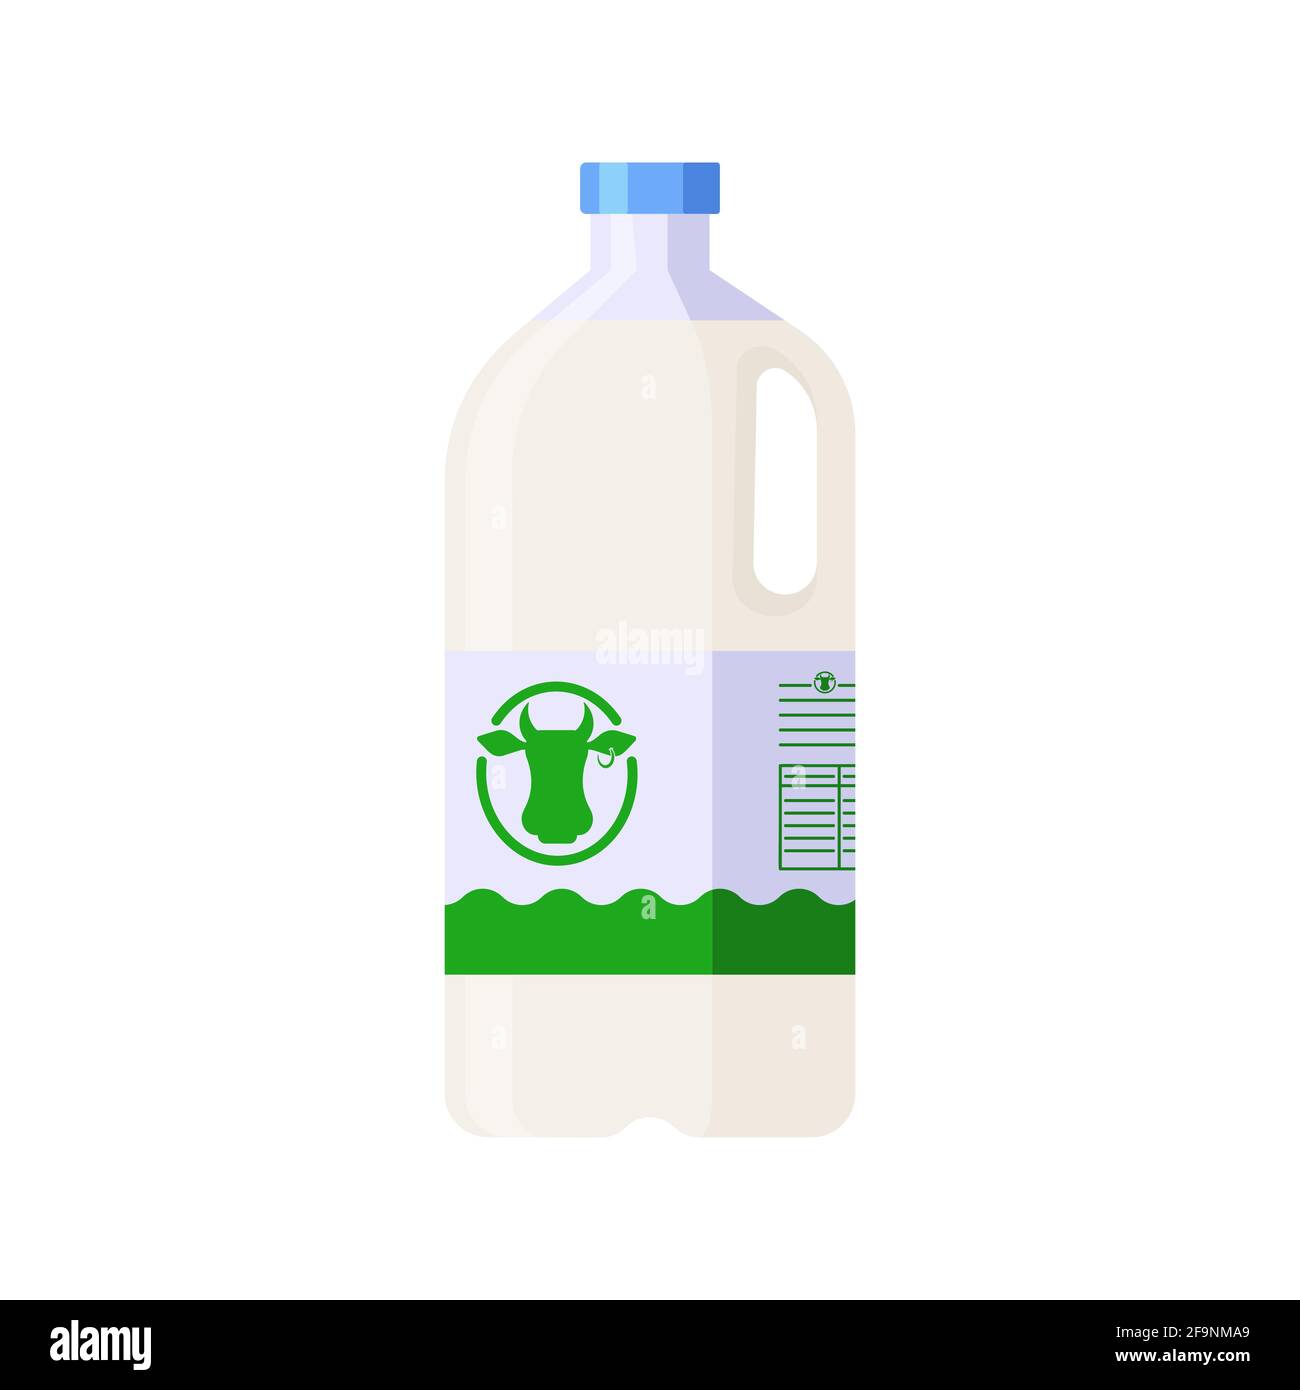 https://c8.alamy.com/comp/2F9NMA9/colorful-vector-milk-plastic-container-icon-flat-style-template-bottle-of-milk-in-white-blue-and-green-colors-2F9NMA9.jpg